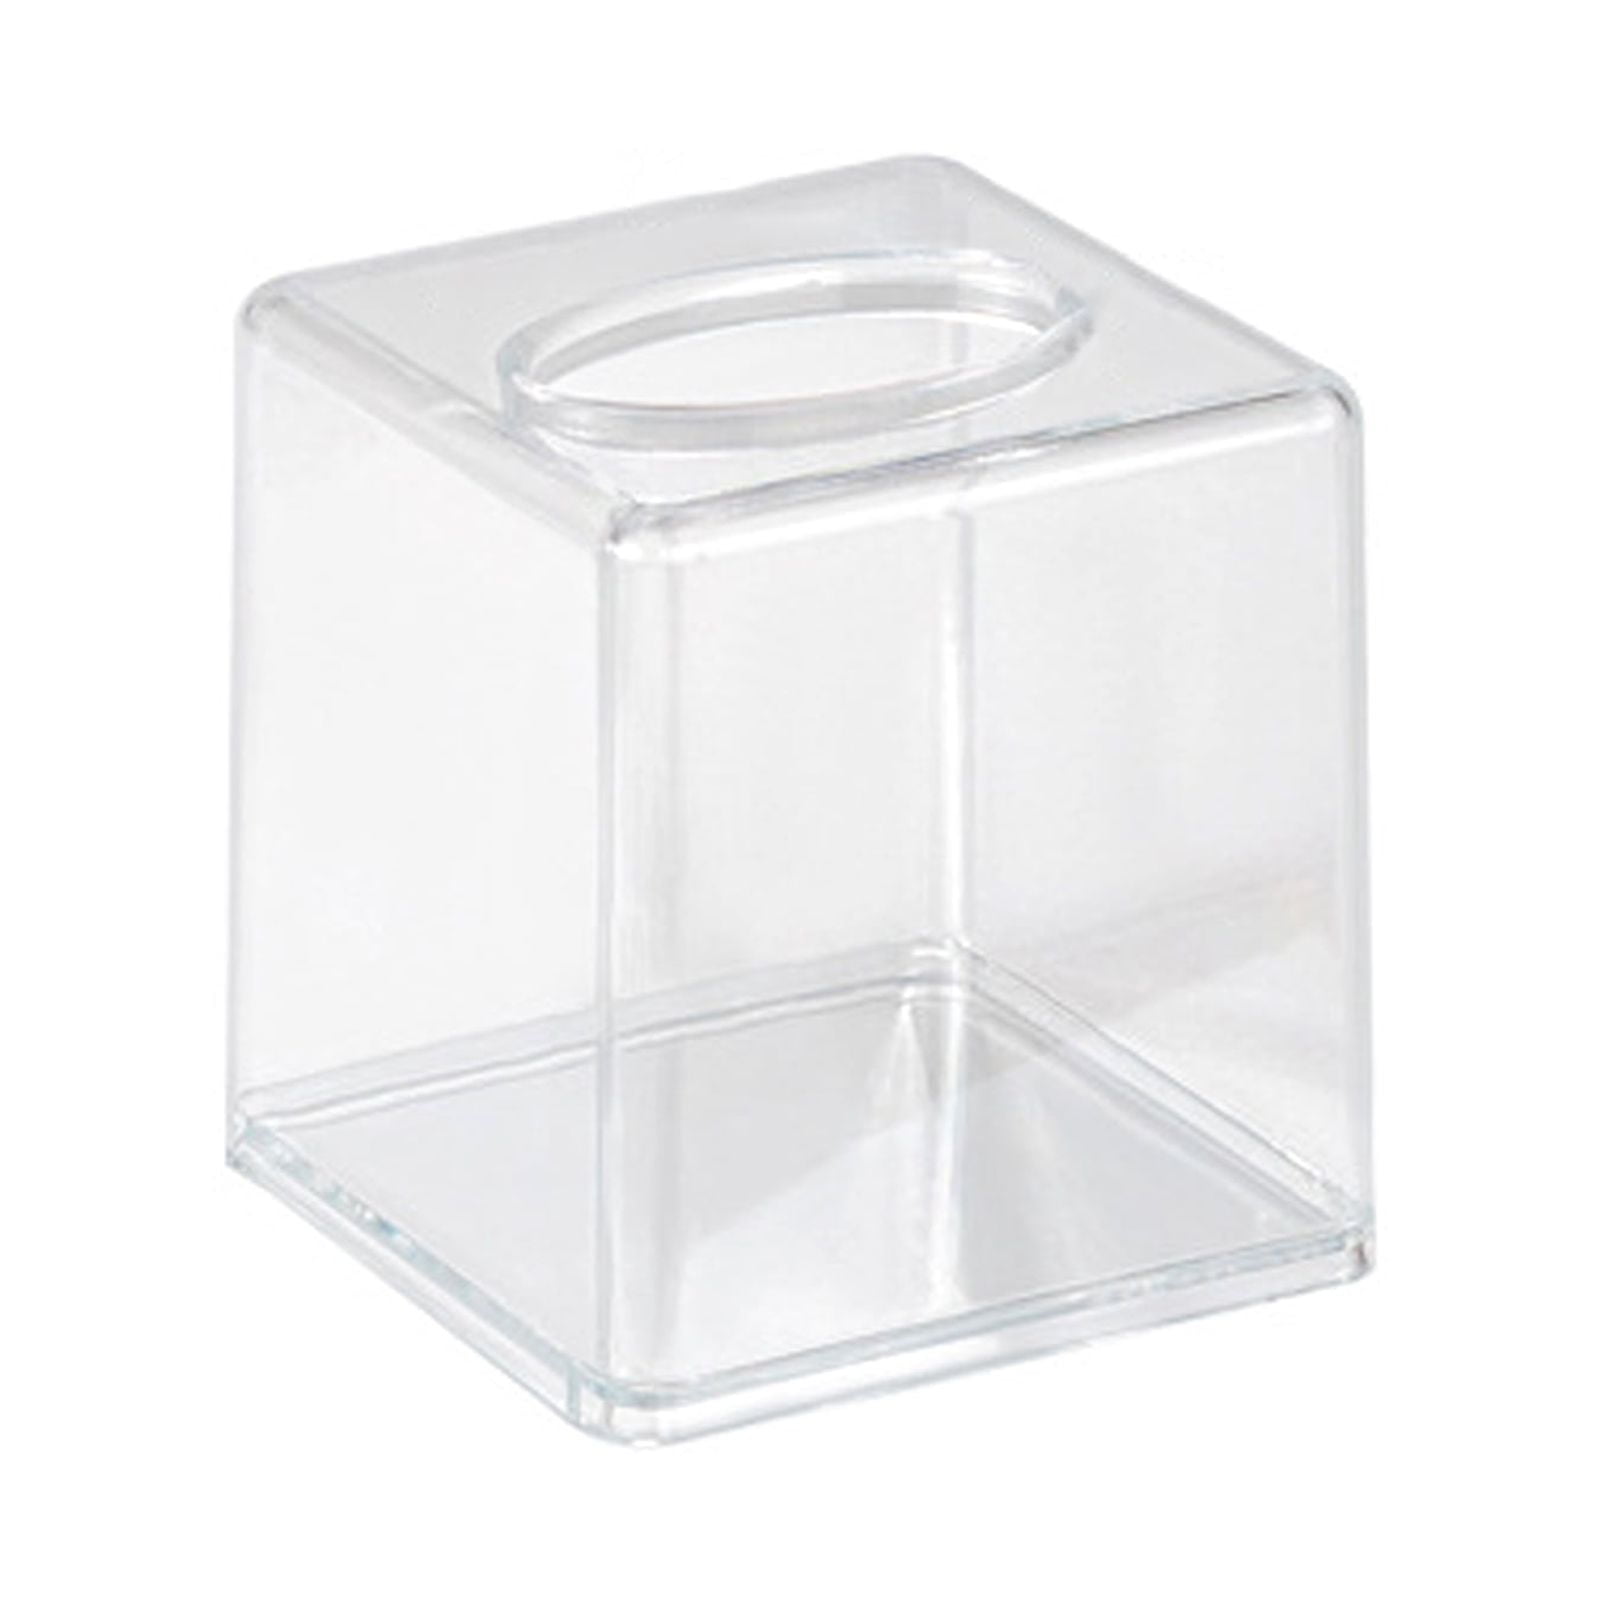 Simple box for storing cleaning wipes for glasses by gbirk